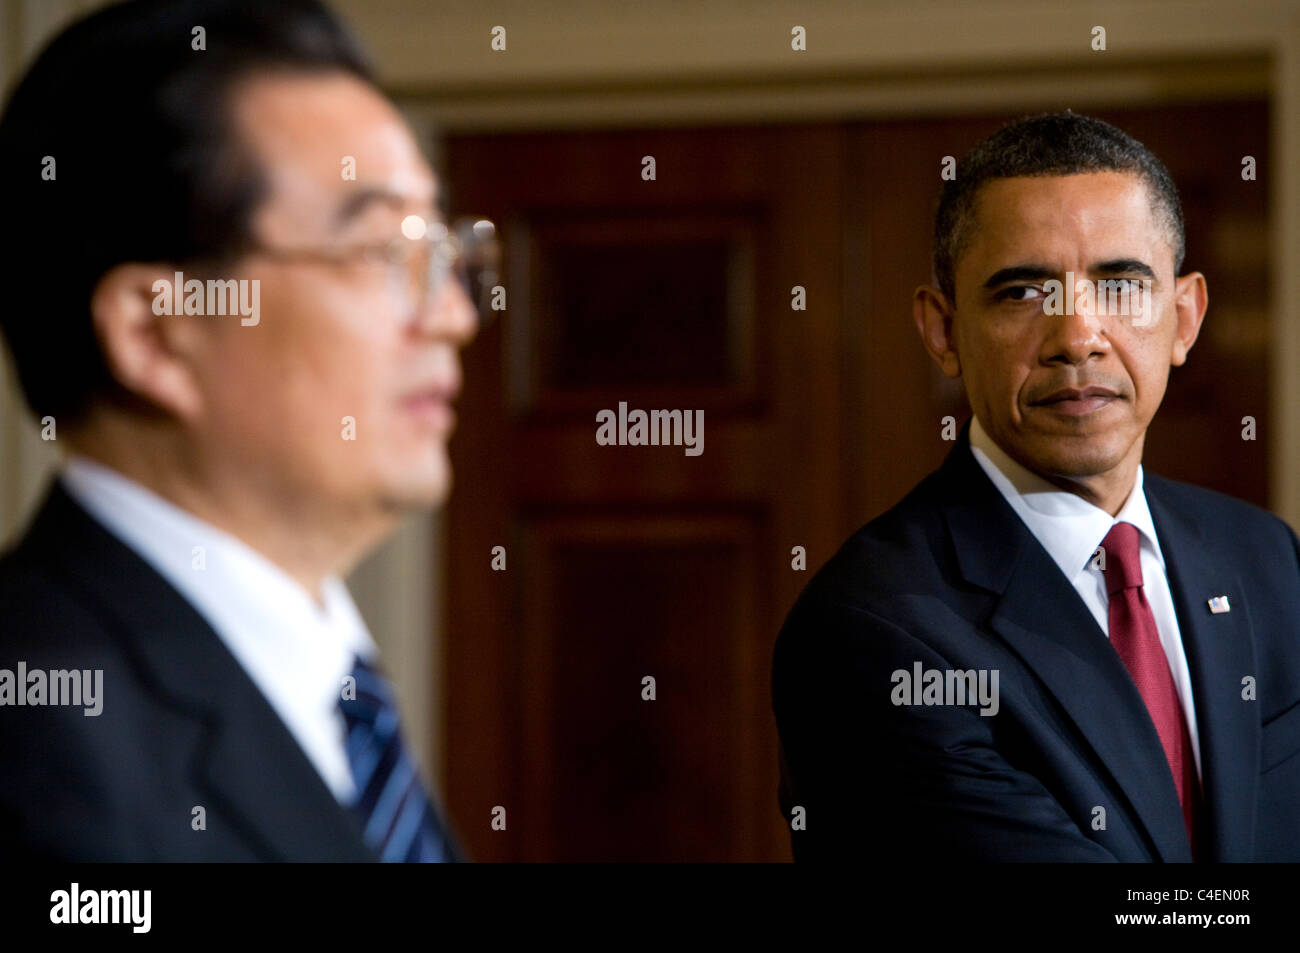 President Barack Obama and Chinese Prime Minister Hu Jintao participate in a joint press conference at the White House. Stock Photo